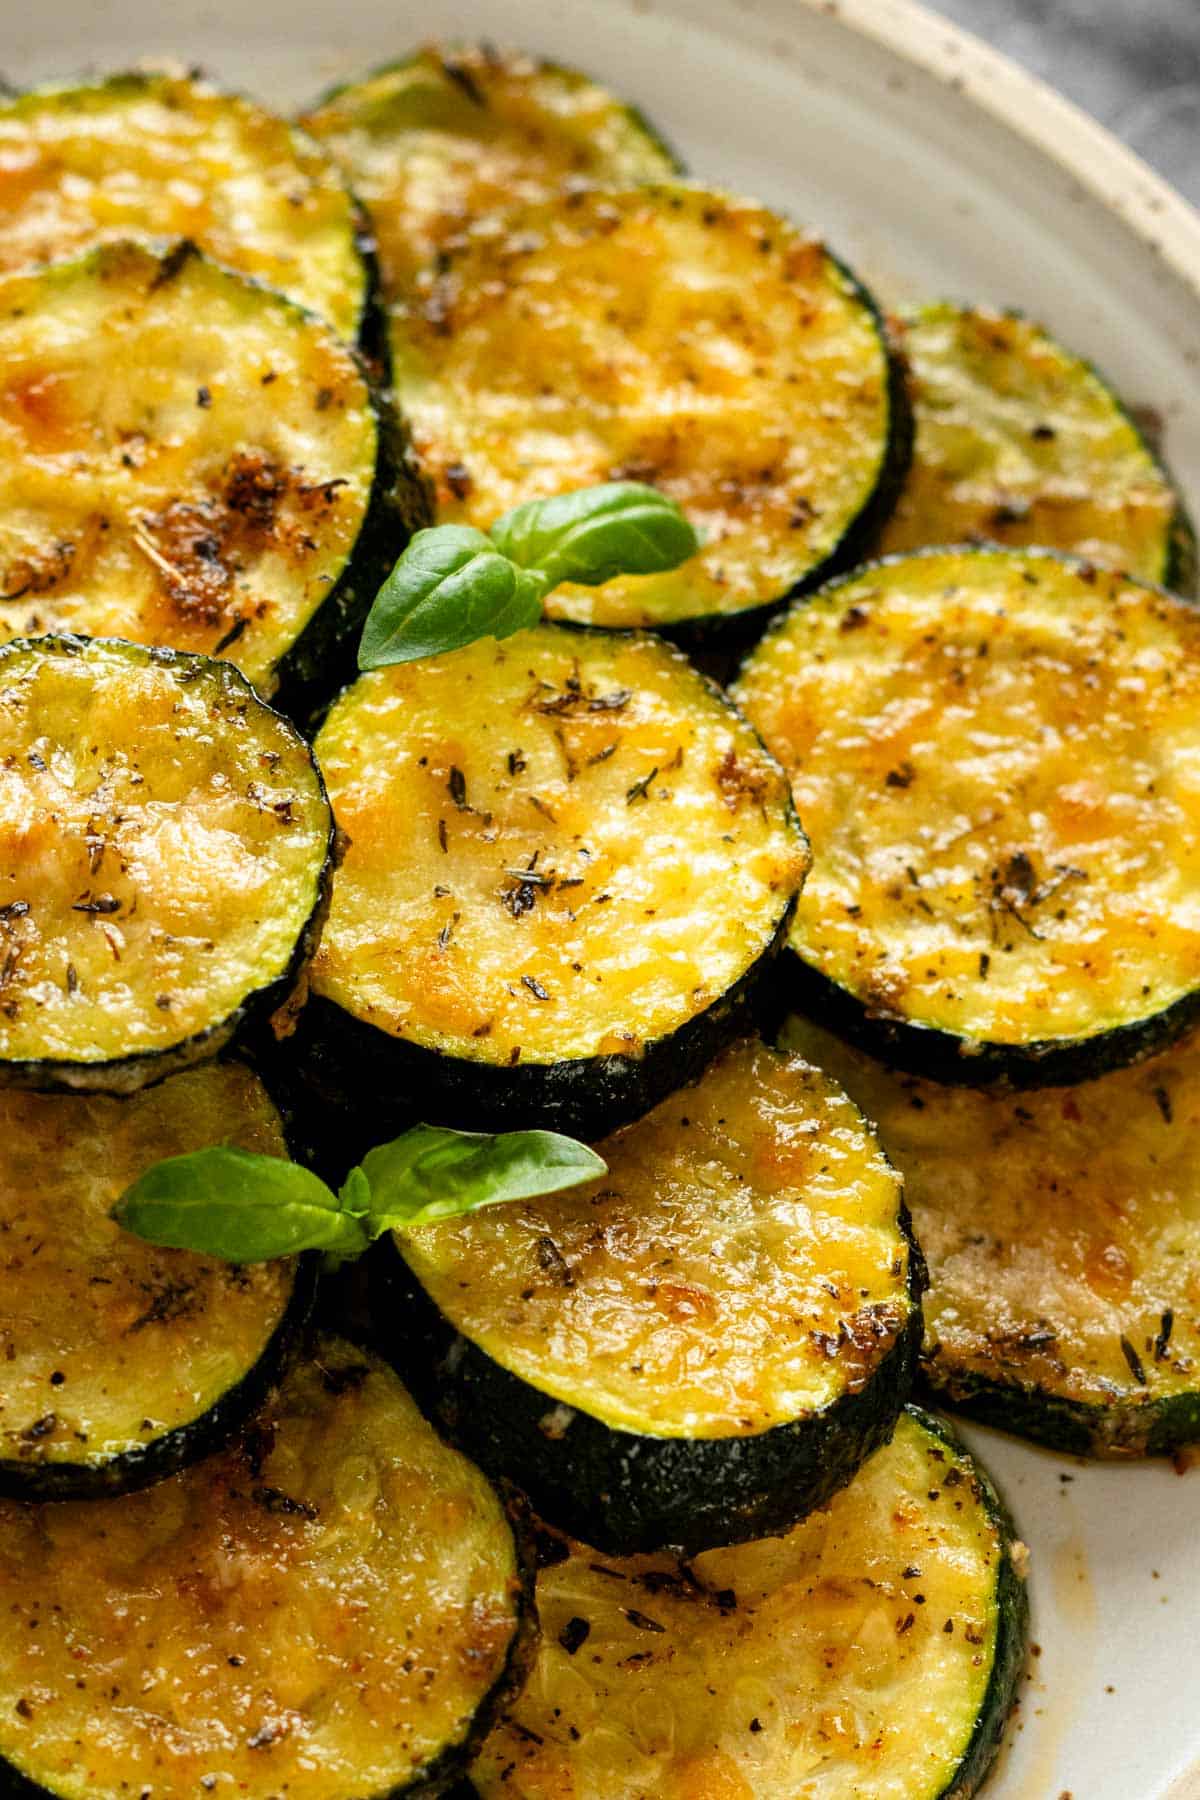 baked parmesan zucchini rounds garnished with fresh basil leaves.